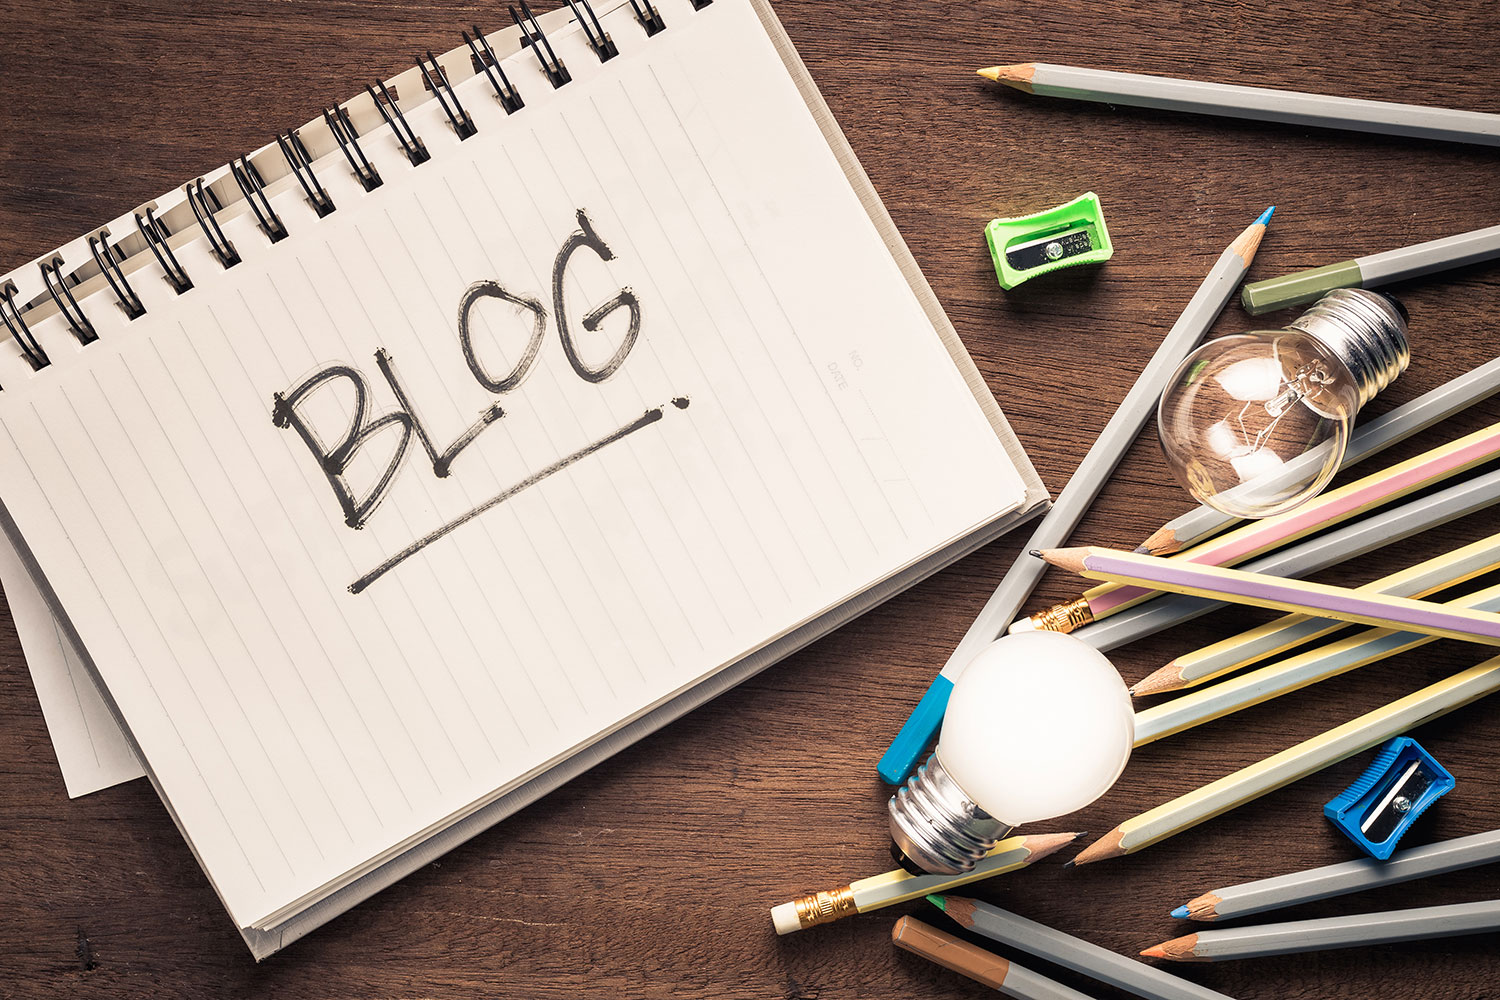 What to write or publish on your Blog